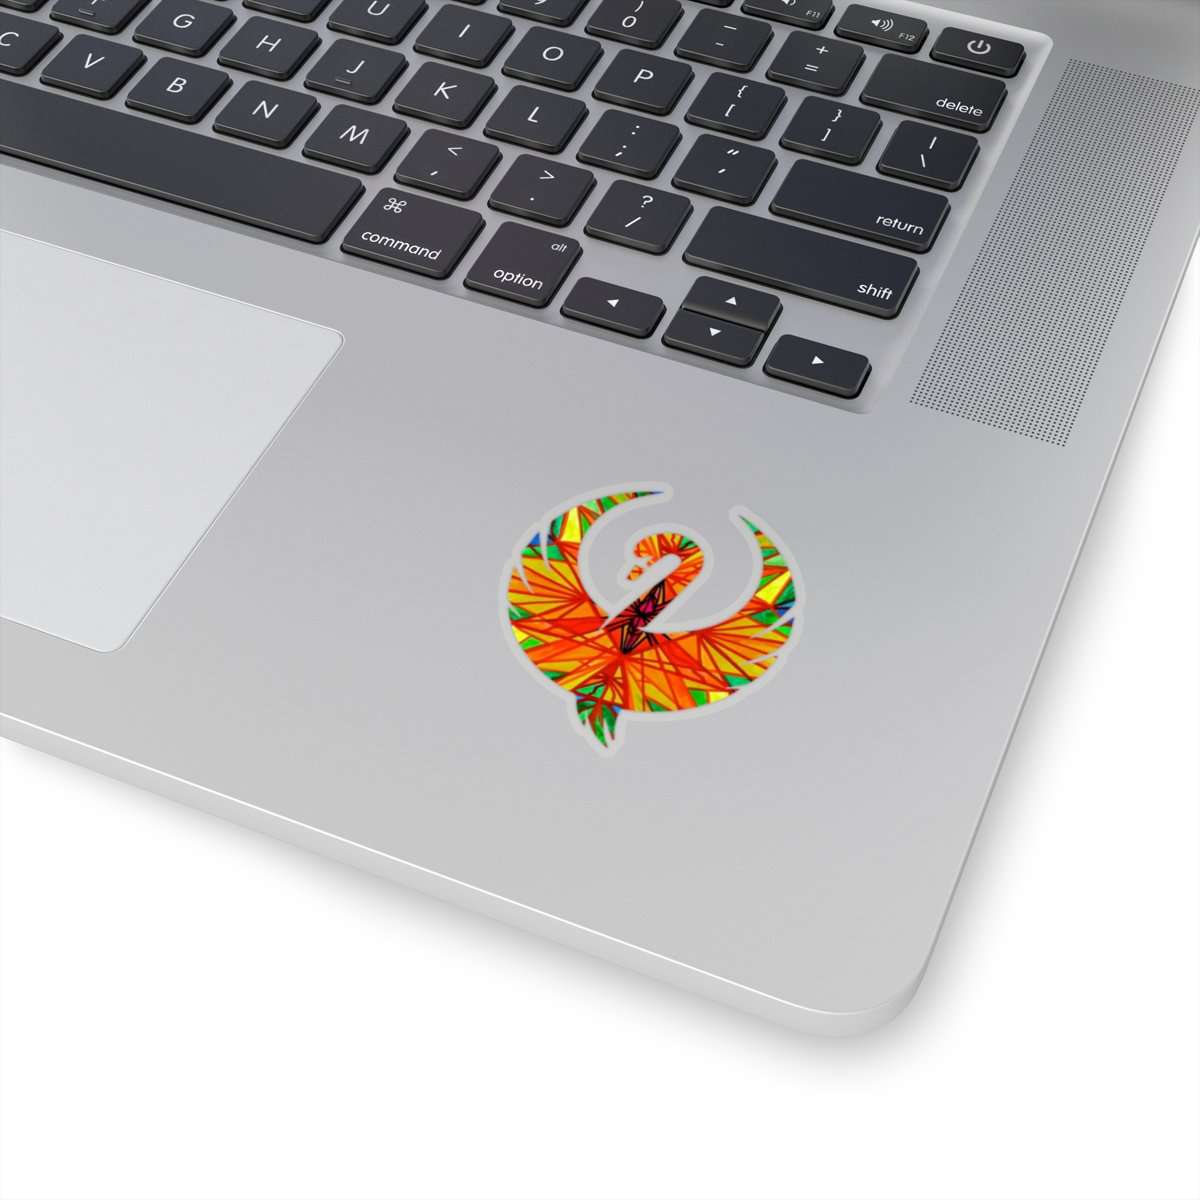 we-offer-a-huge-selection-of-cheap-self-liberate-swan-stickers-online-now_1.jpg